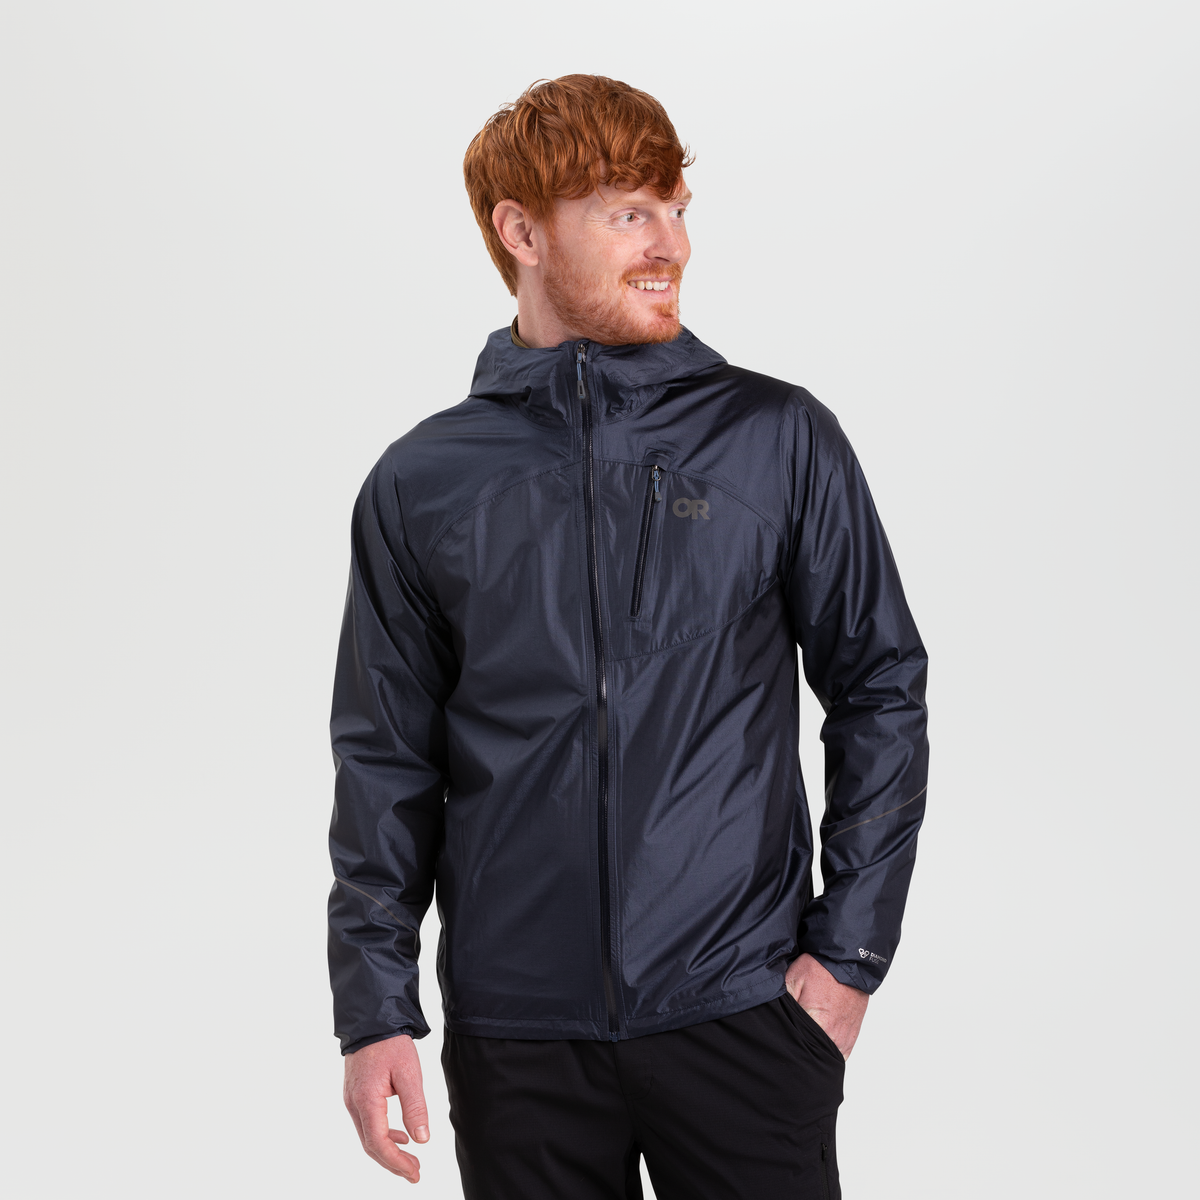 Unlock Wilderness' choice in the Outdoor Research Vs North Face comparison, the Helium Rain Jacket by Outdoor Research